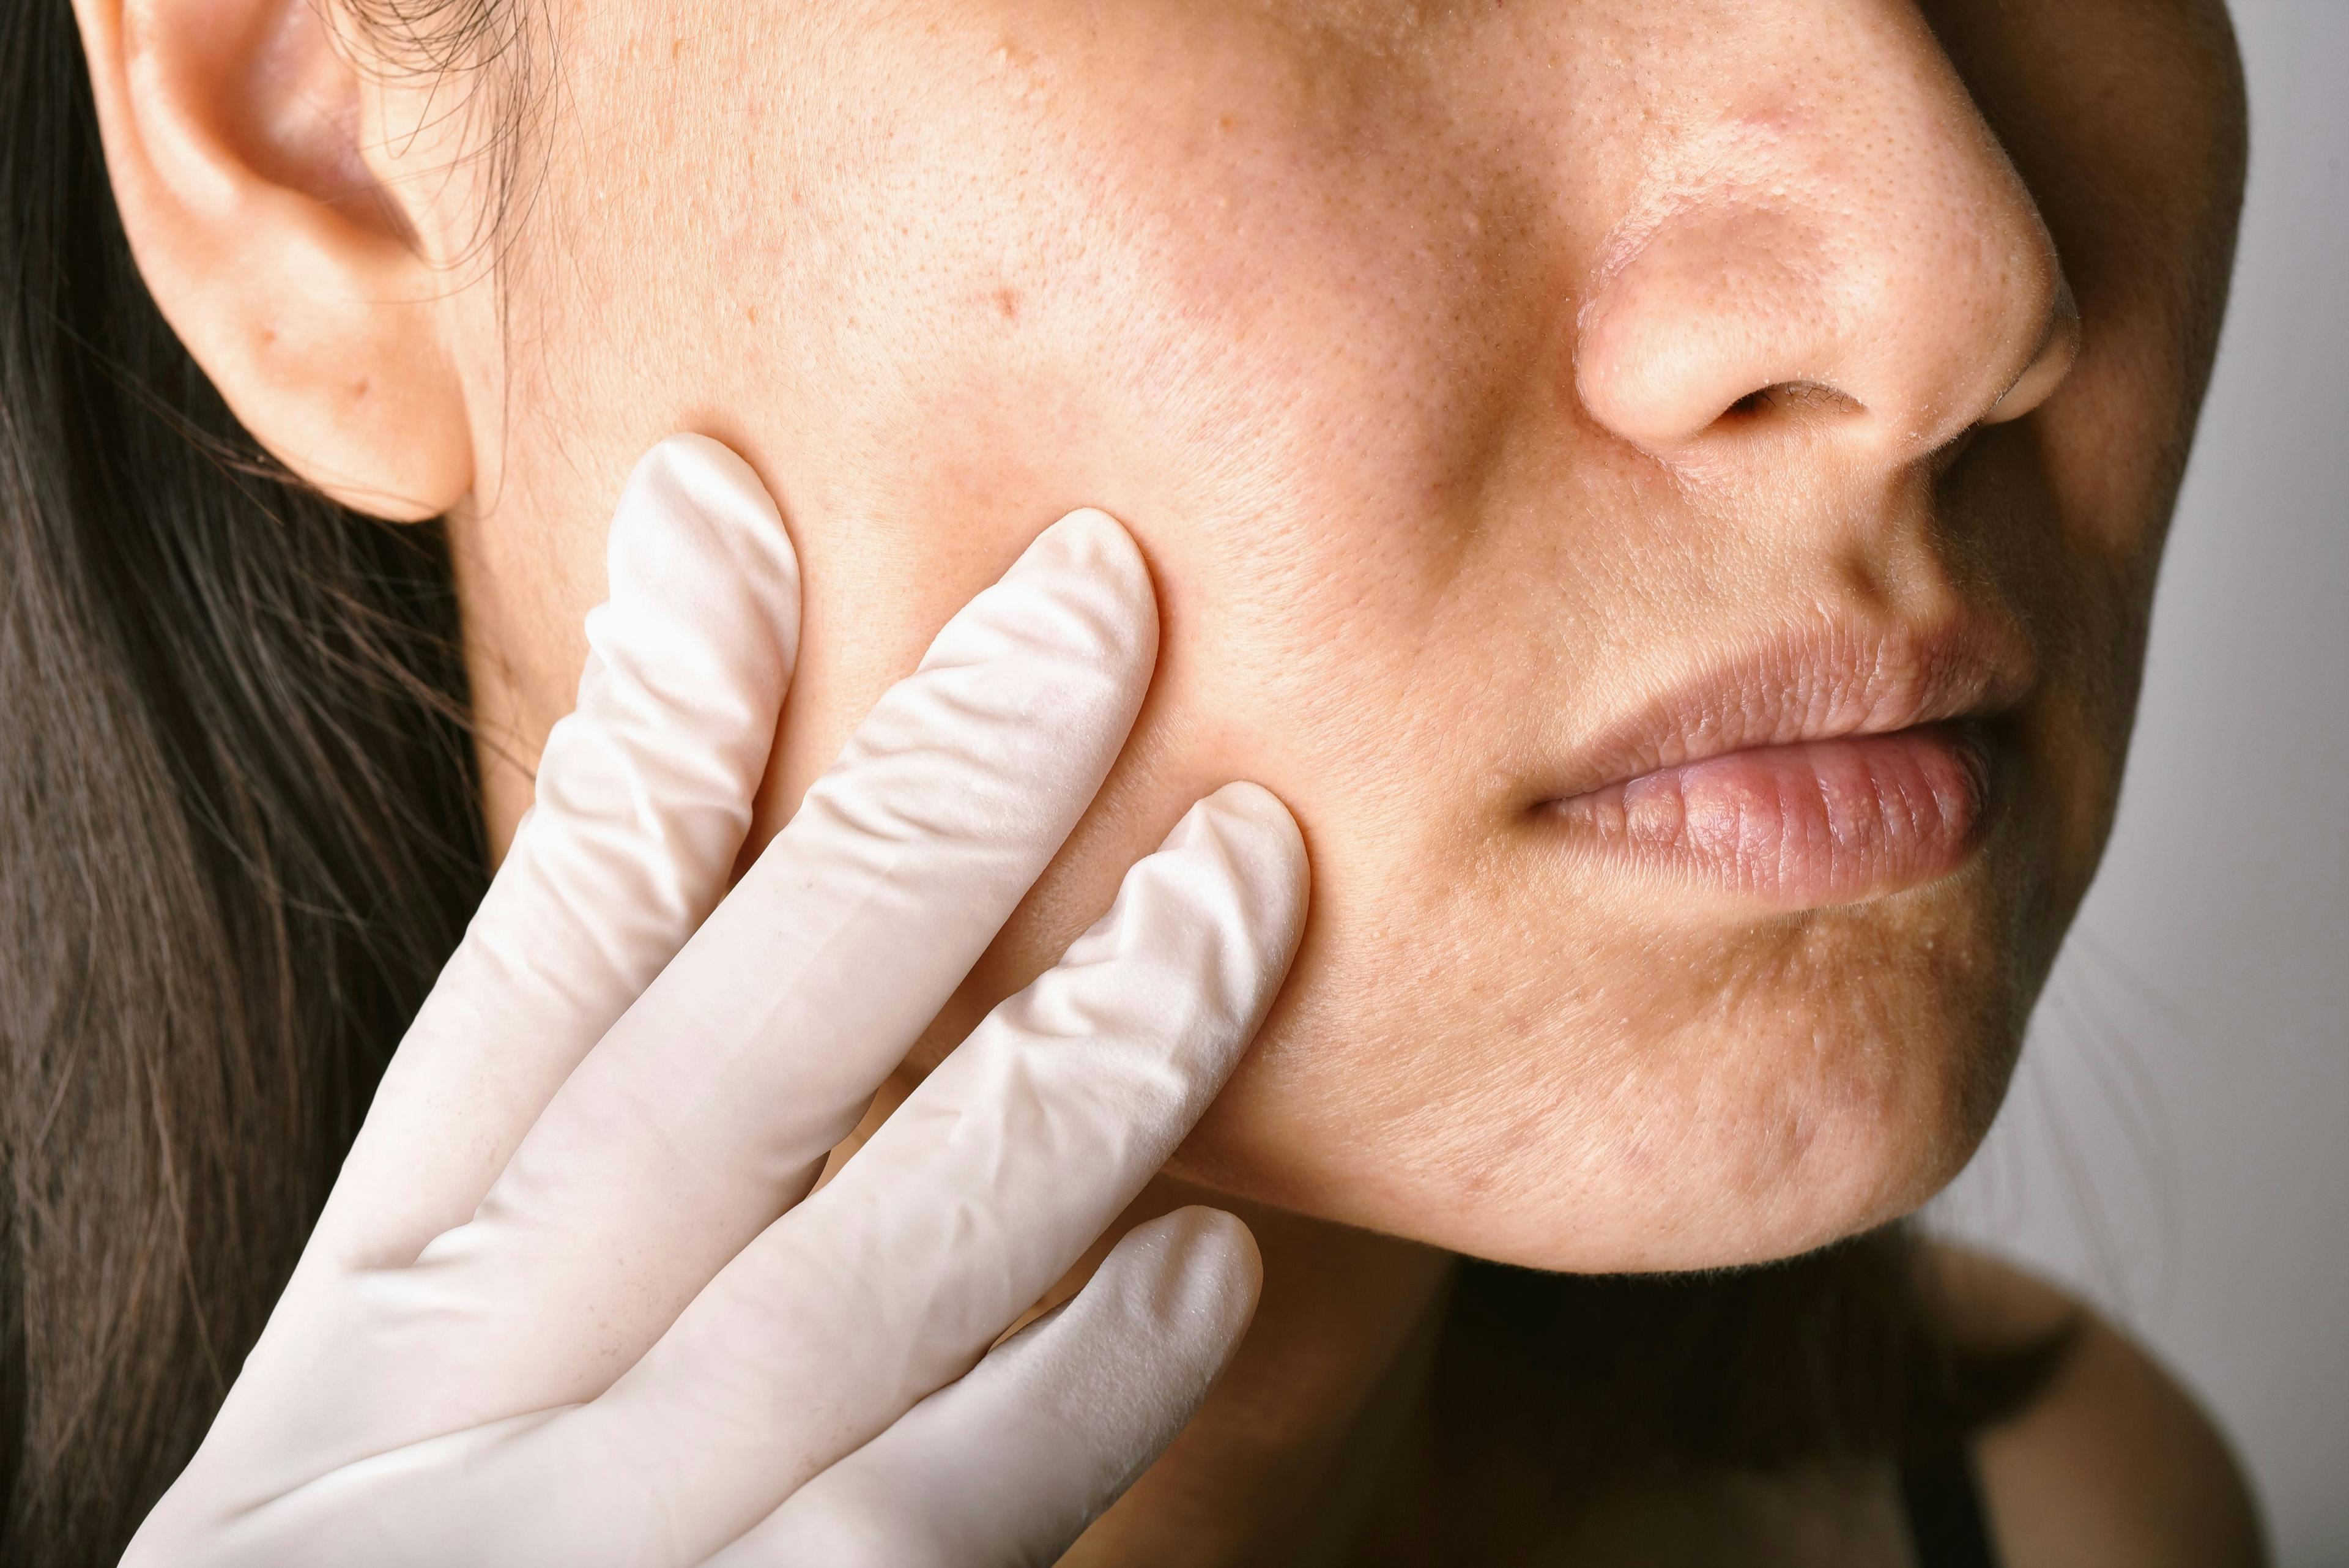 Doctor examining patient's face | Image Credit: © ARTFULLY-79 - stock.adobe.com